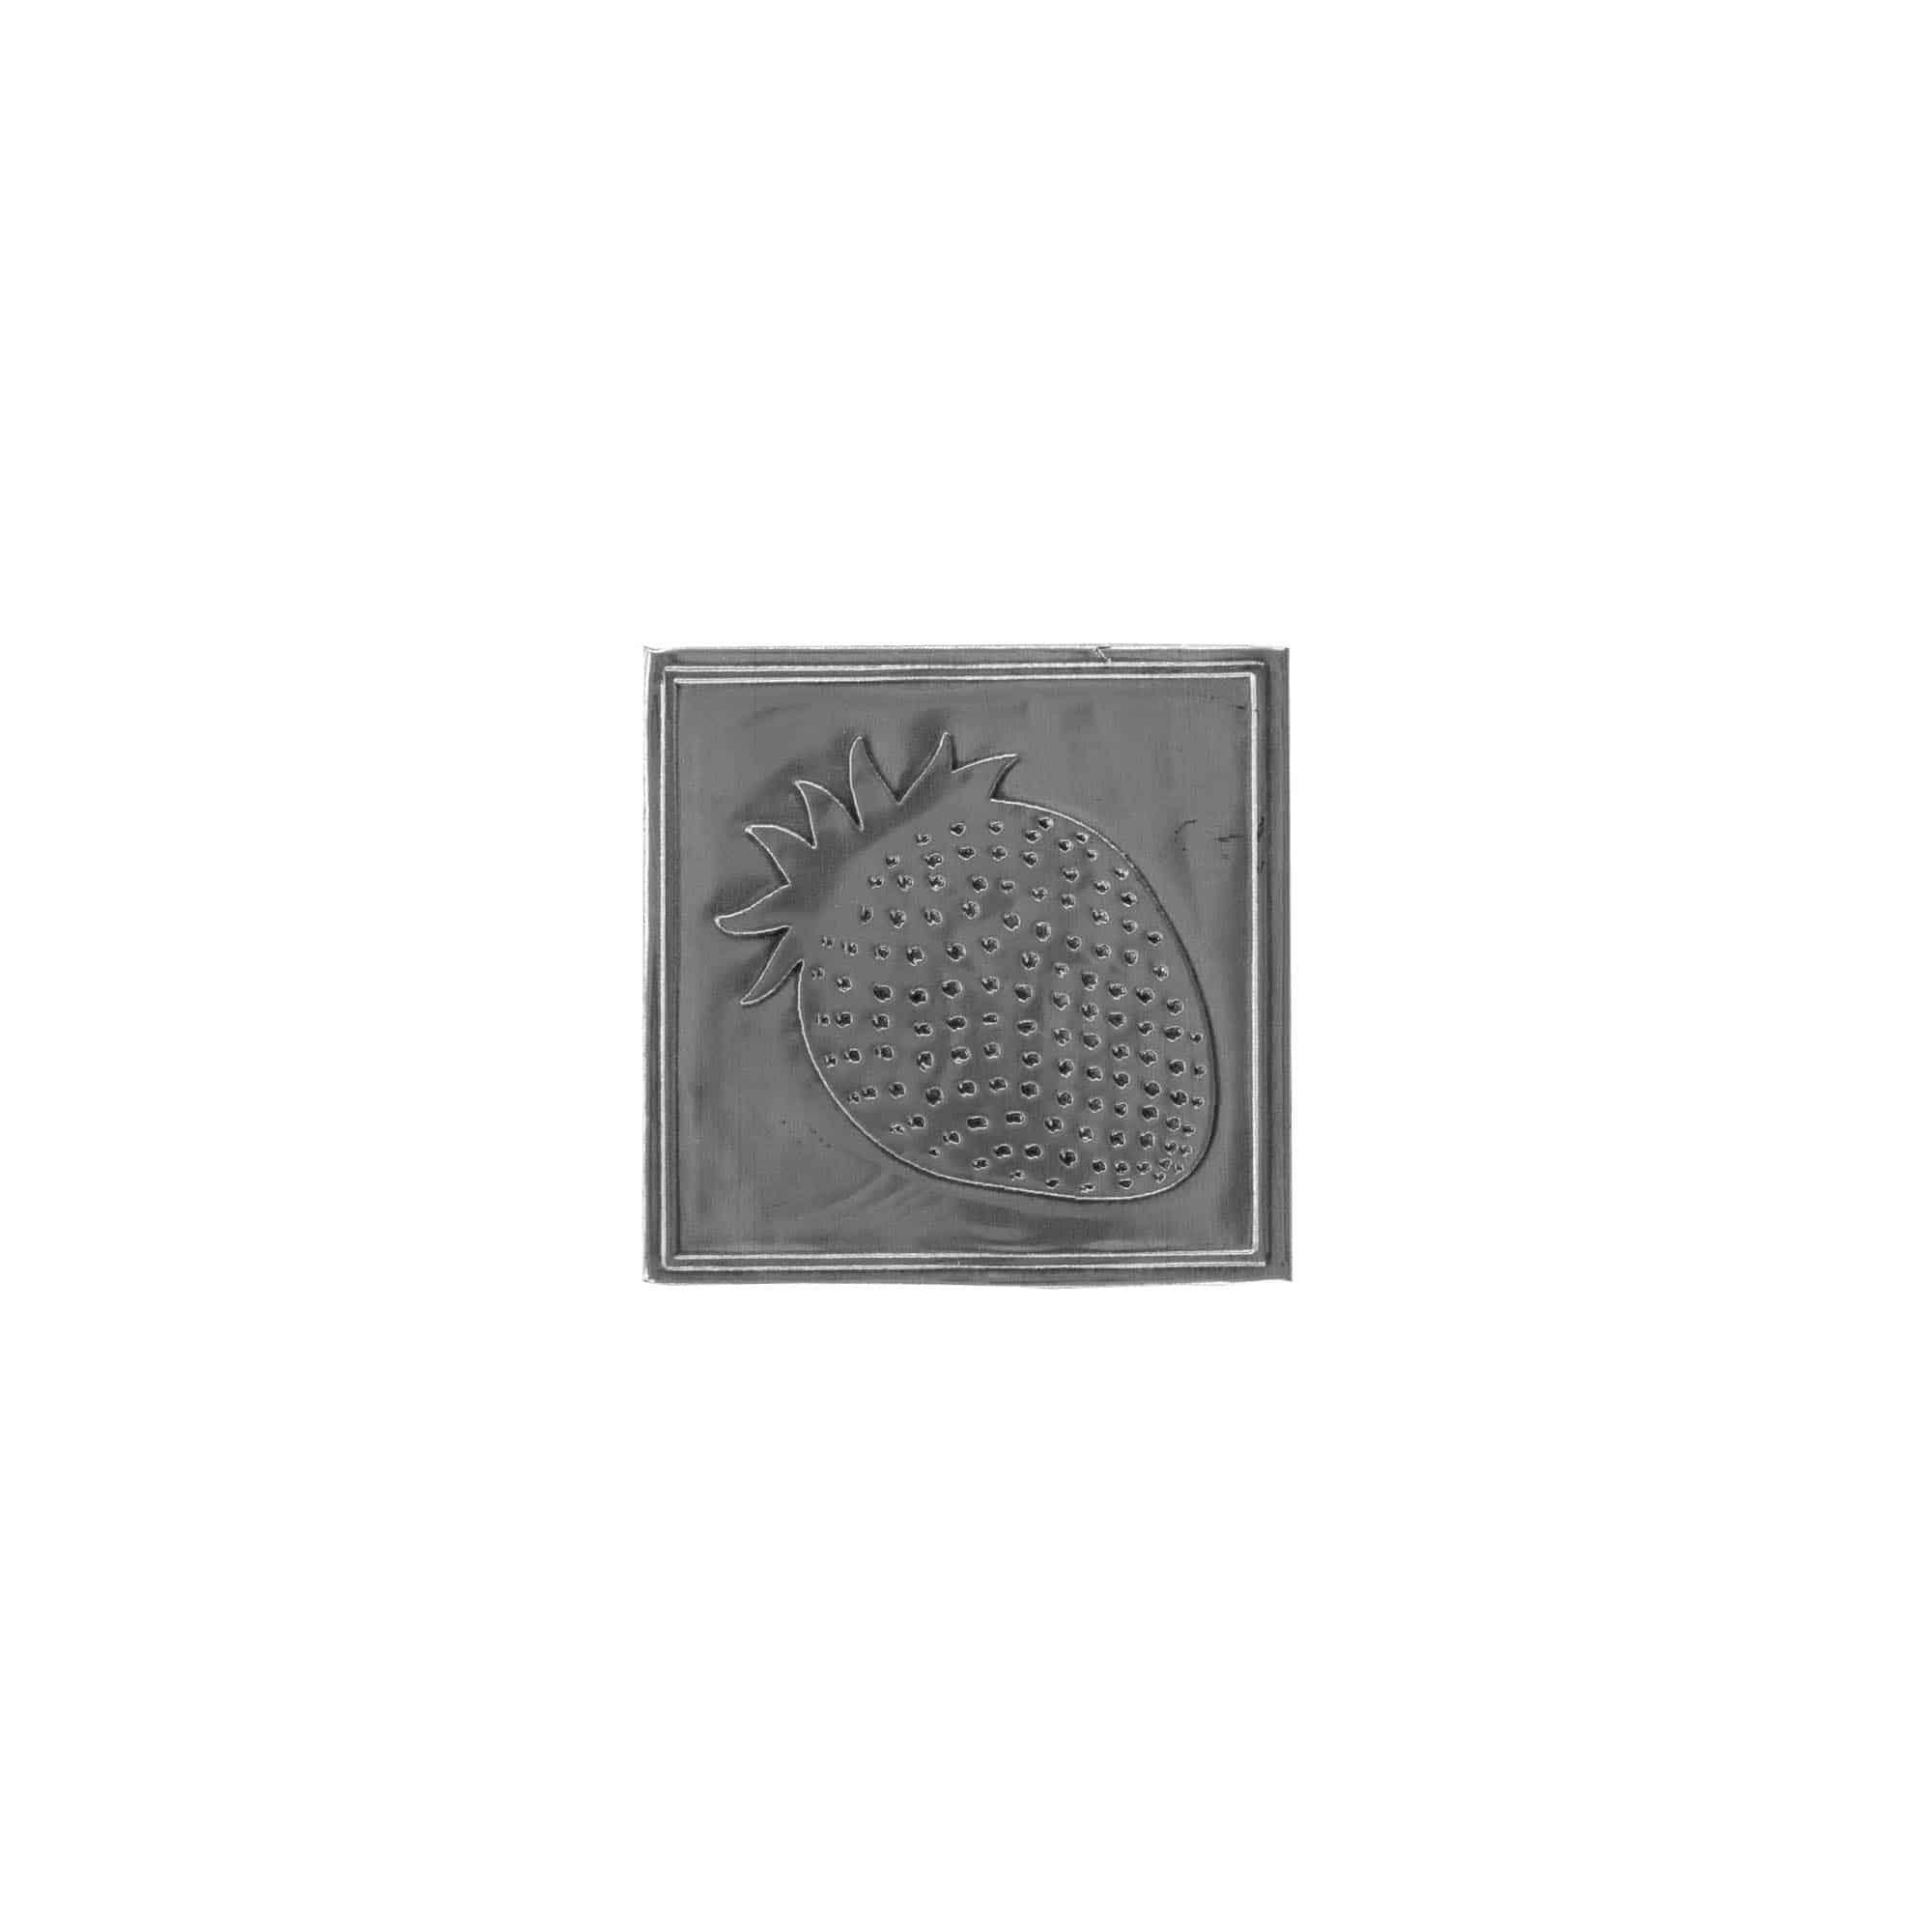 Pewter tag 'Strawberry', square, metal, silver